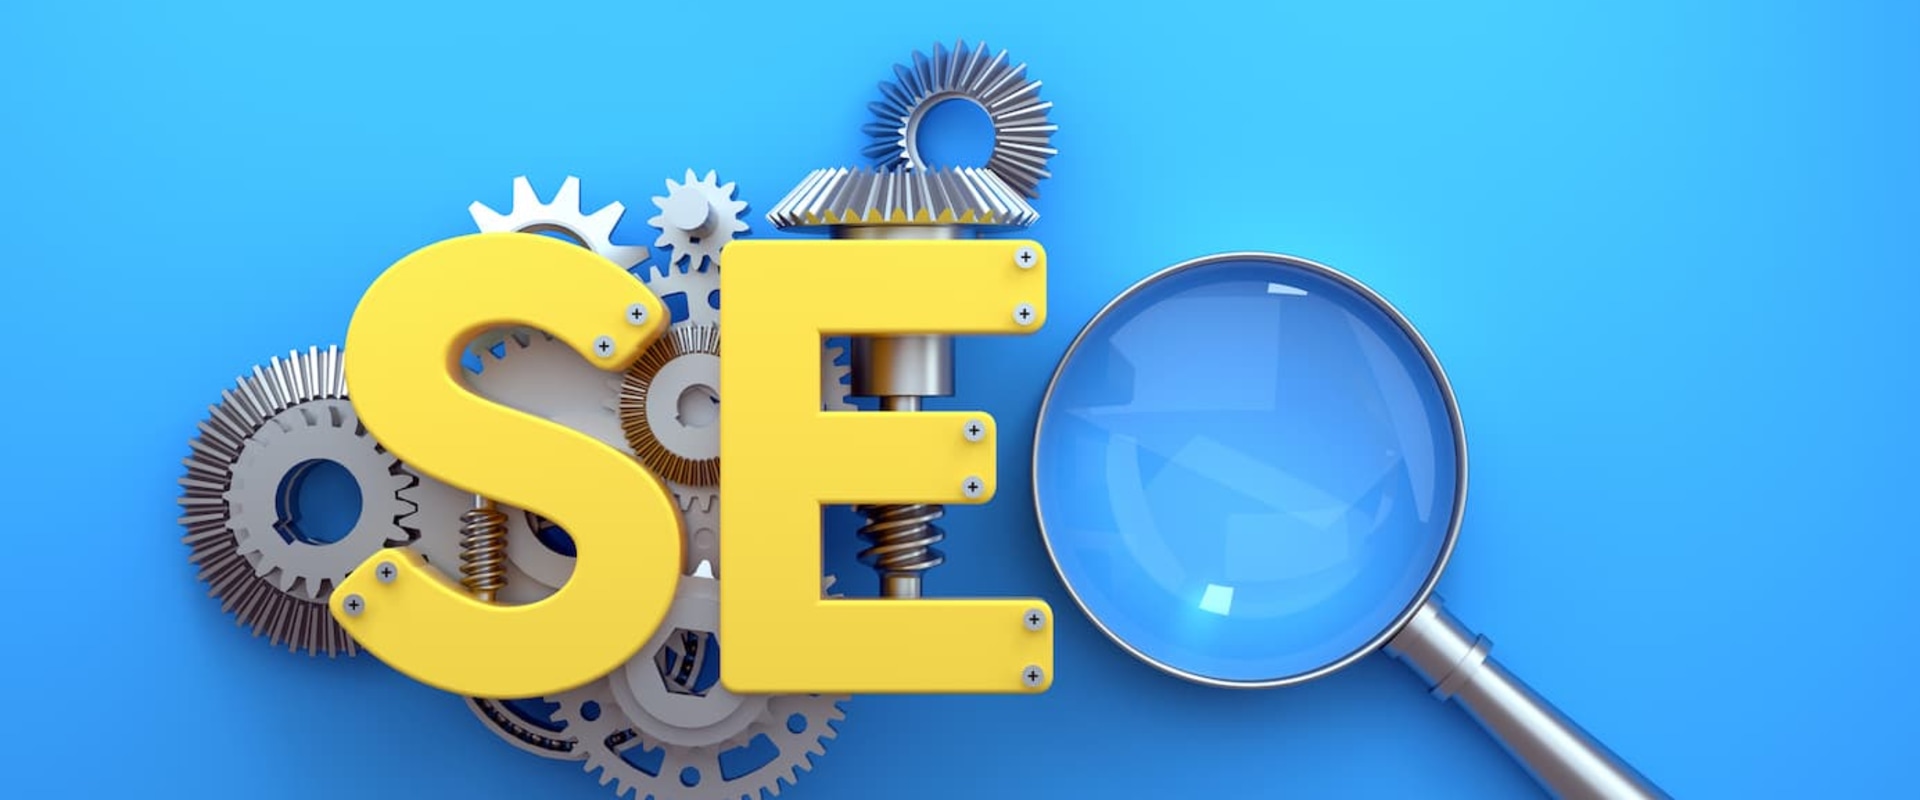 What is seo in basic terms?